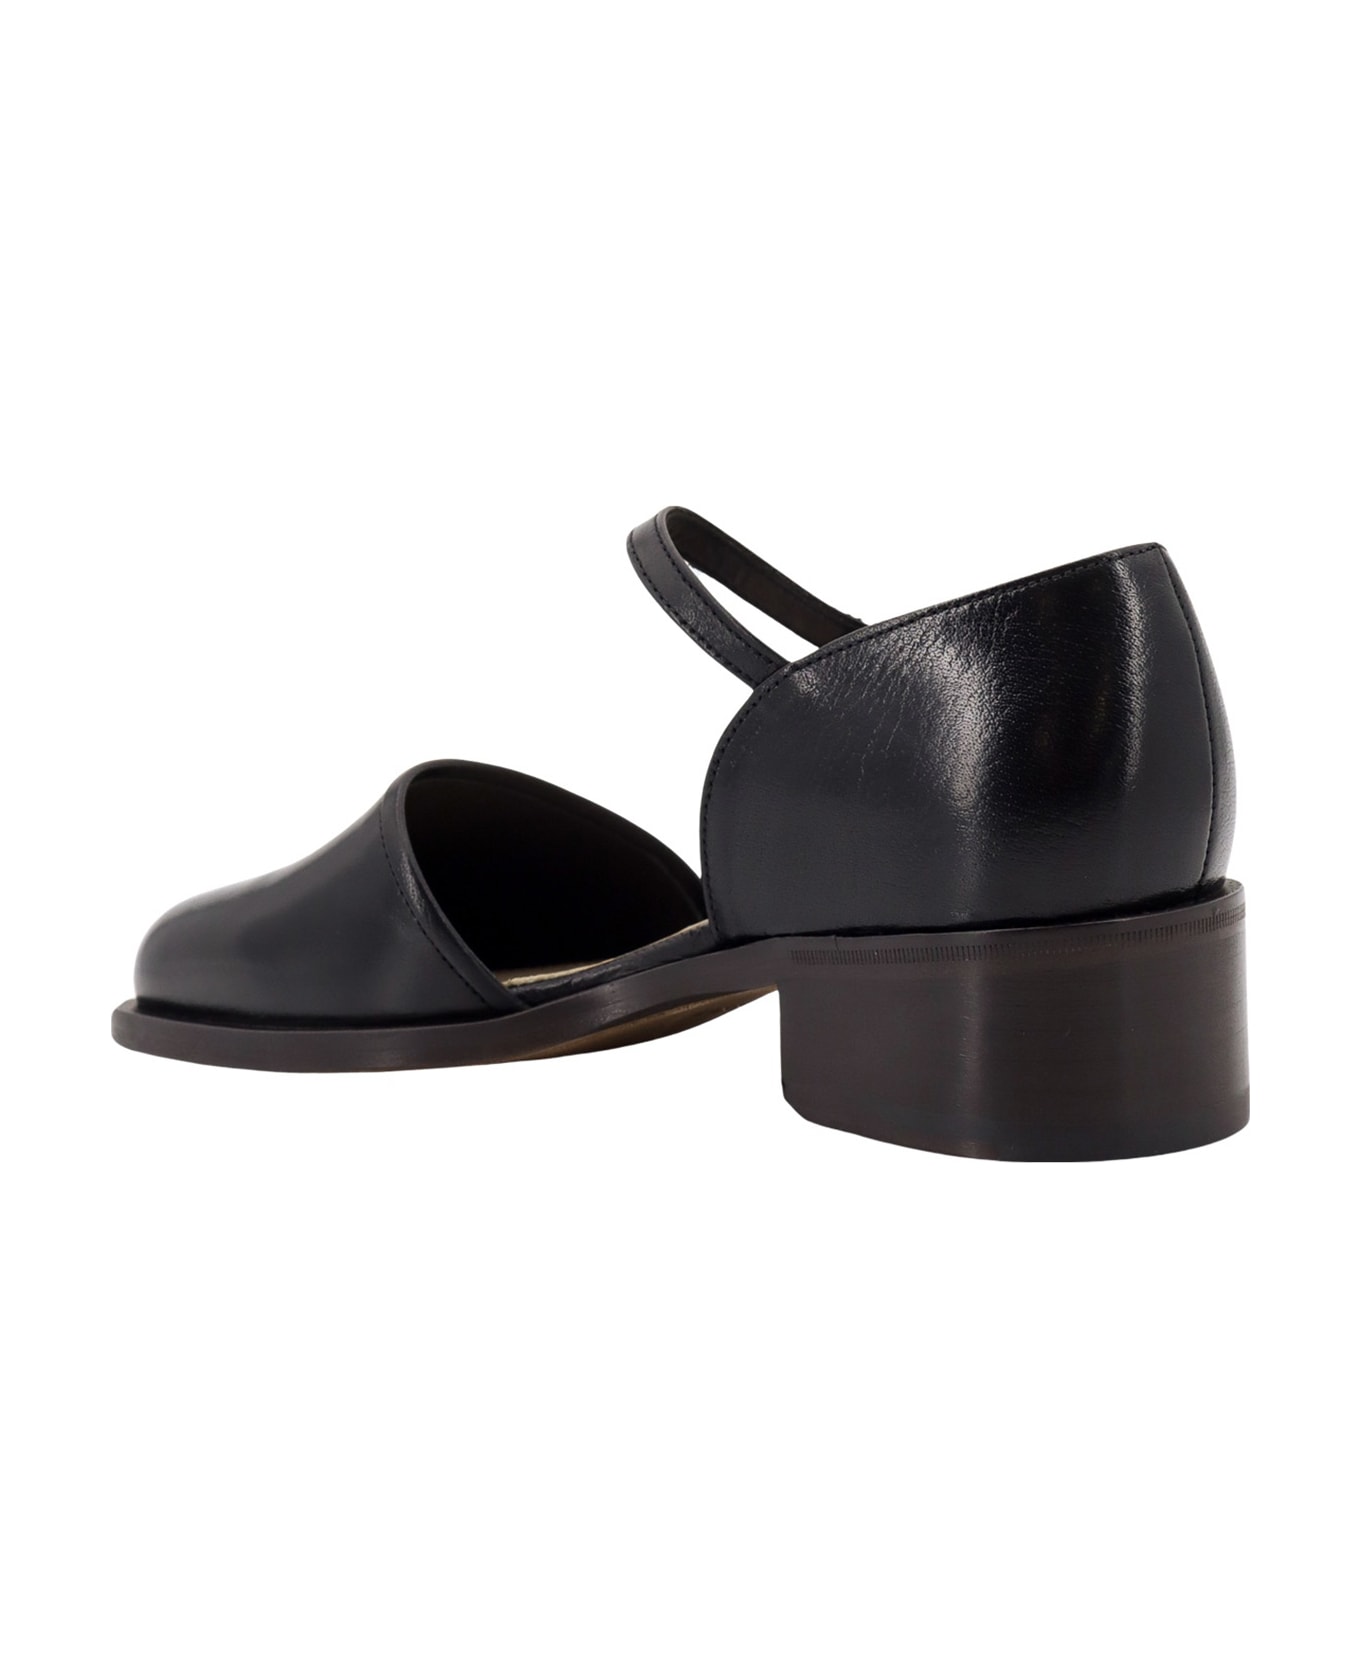 Lemaire Mary Jane Sandals - Black ハイヒール